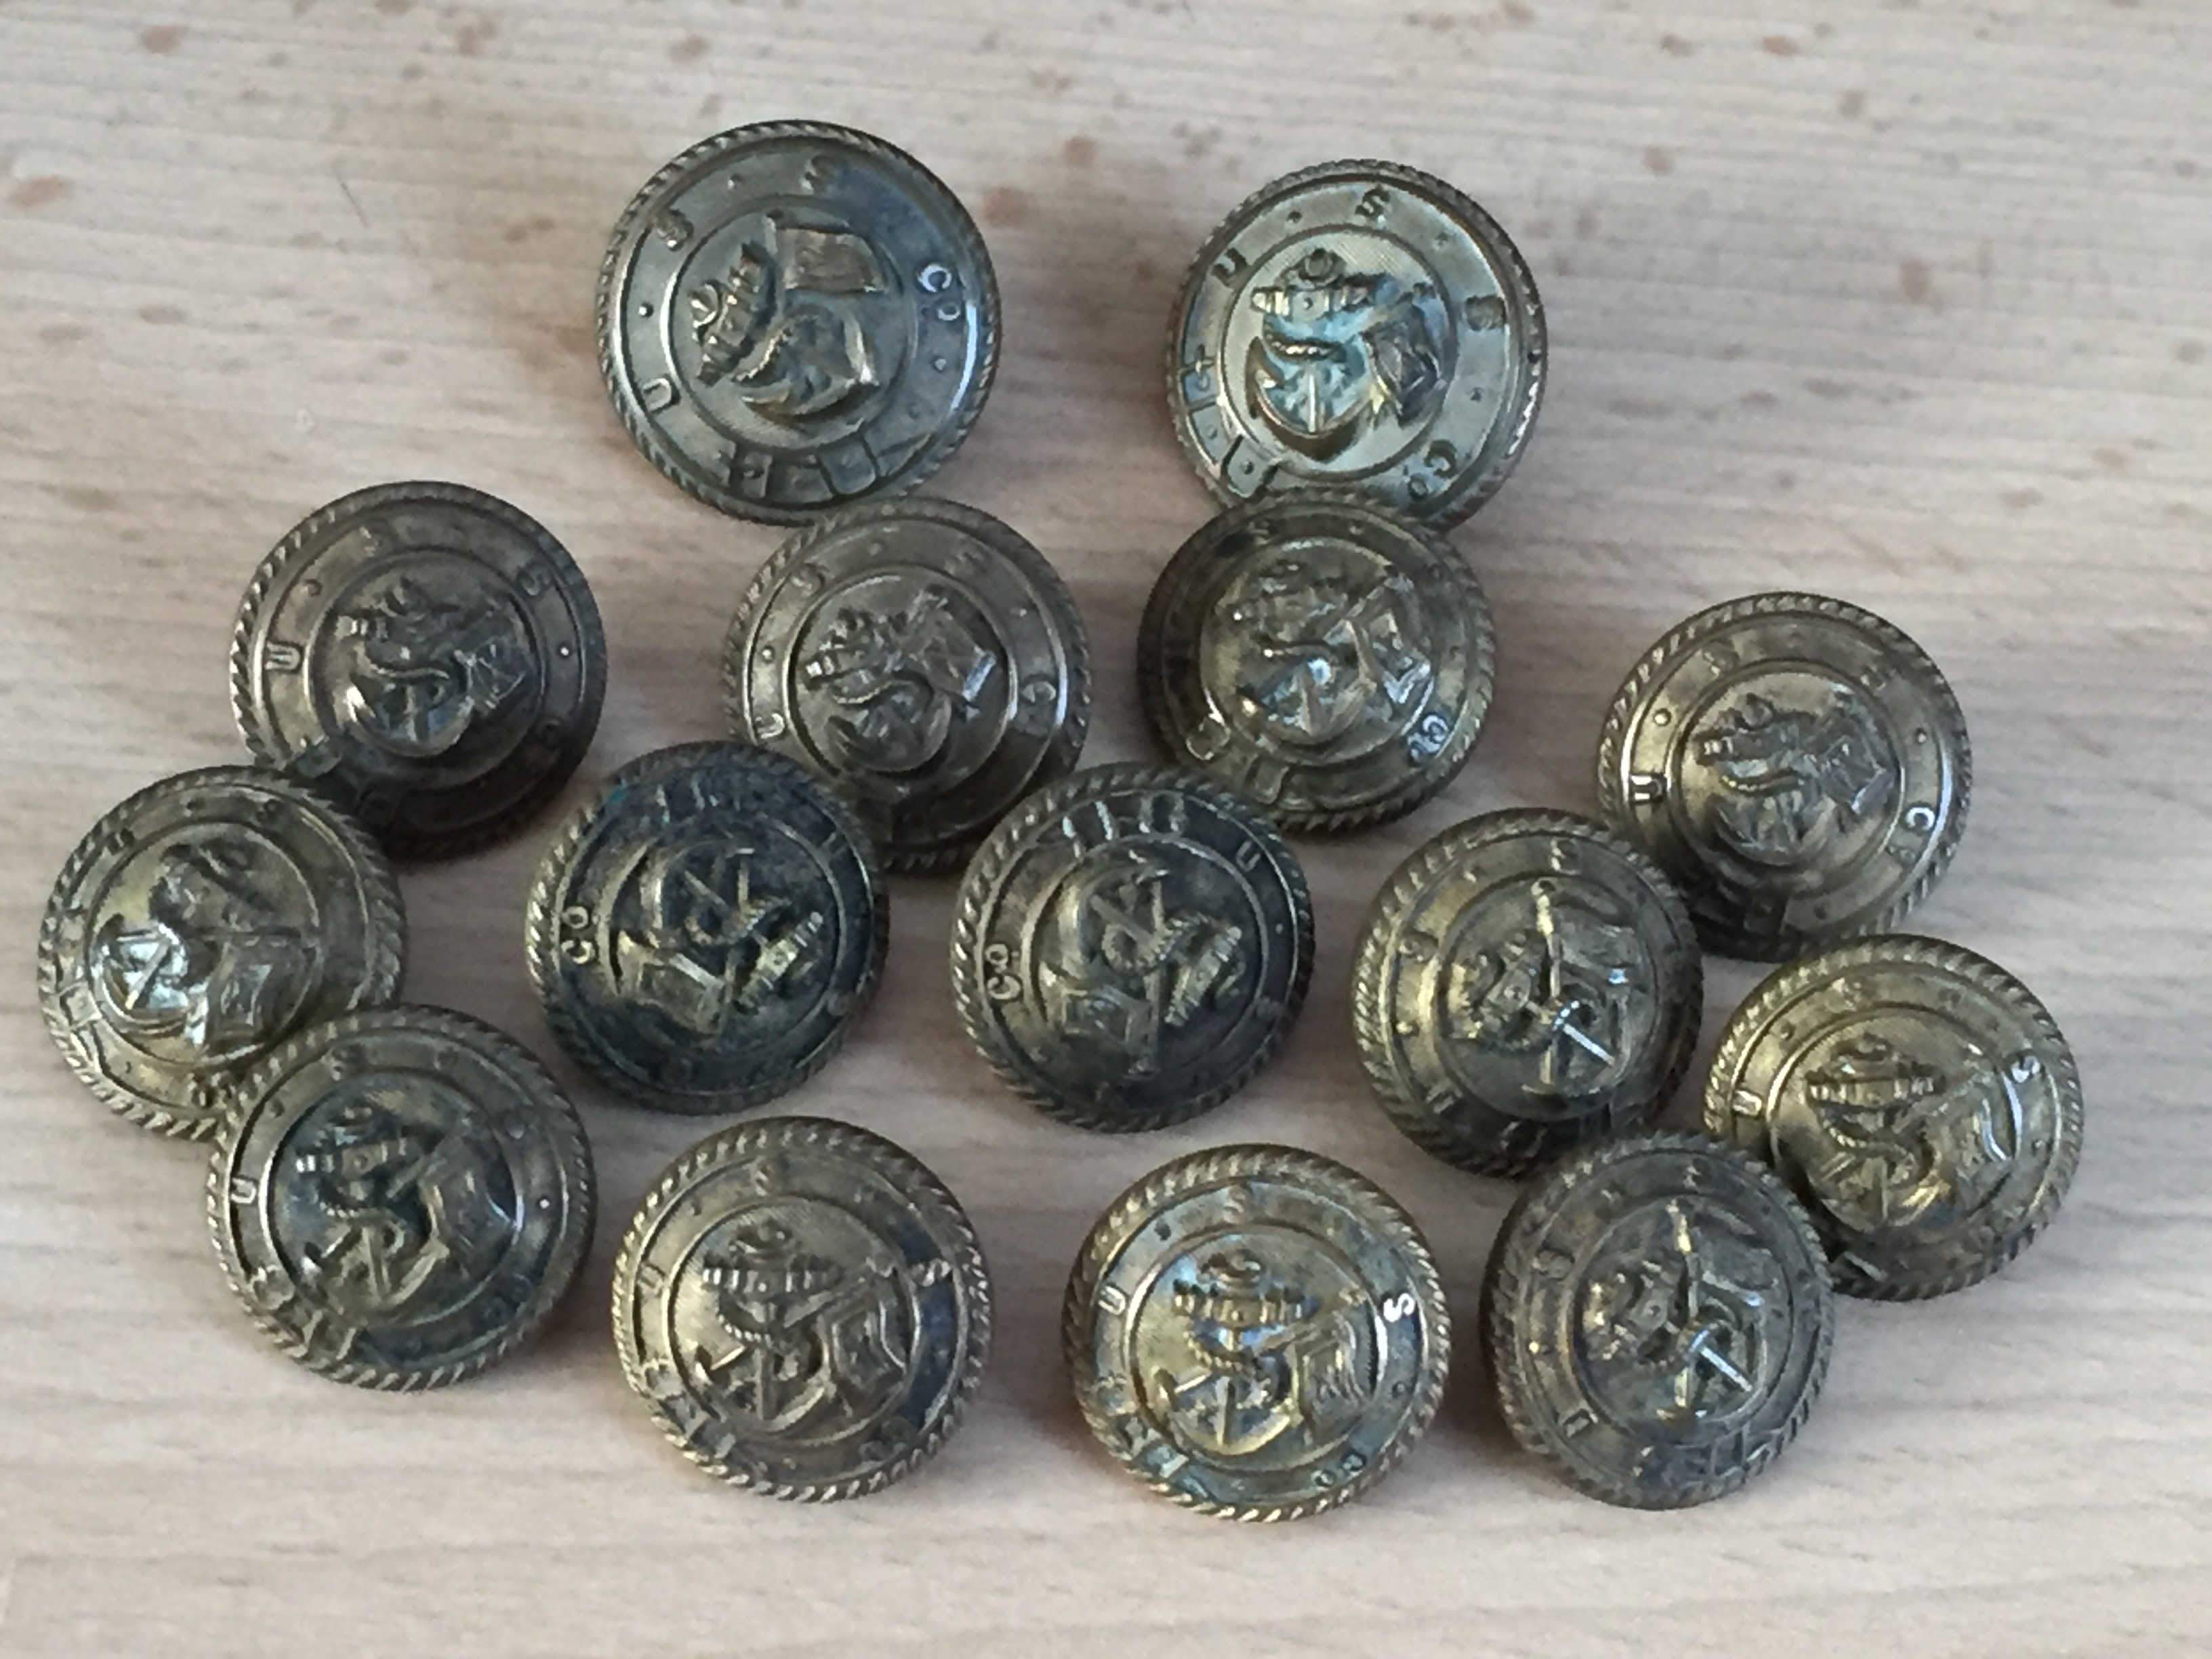 ASSORTED SIZE COLLECTION OF GOLD COLOURED OFFICERS COAT BUTTONS FROM THE UNION STEAMSHIP COMPANY